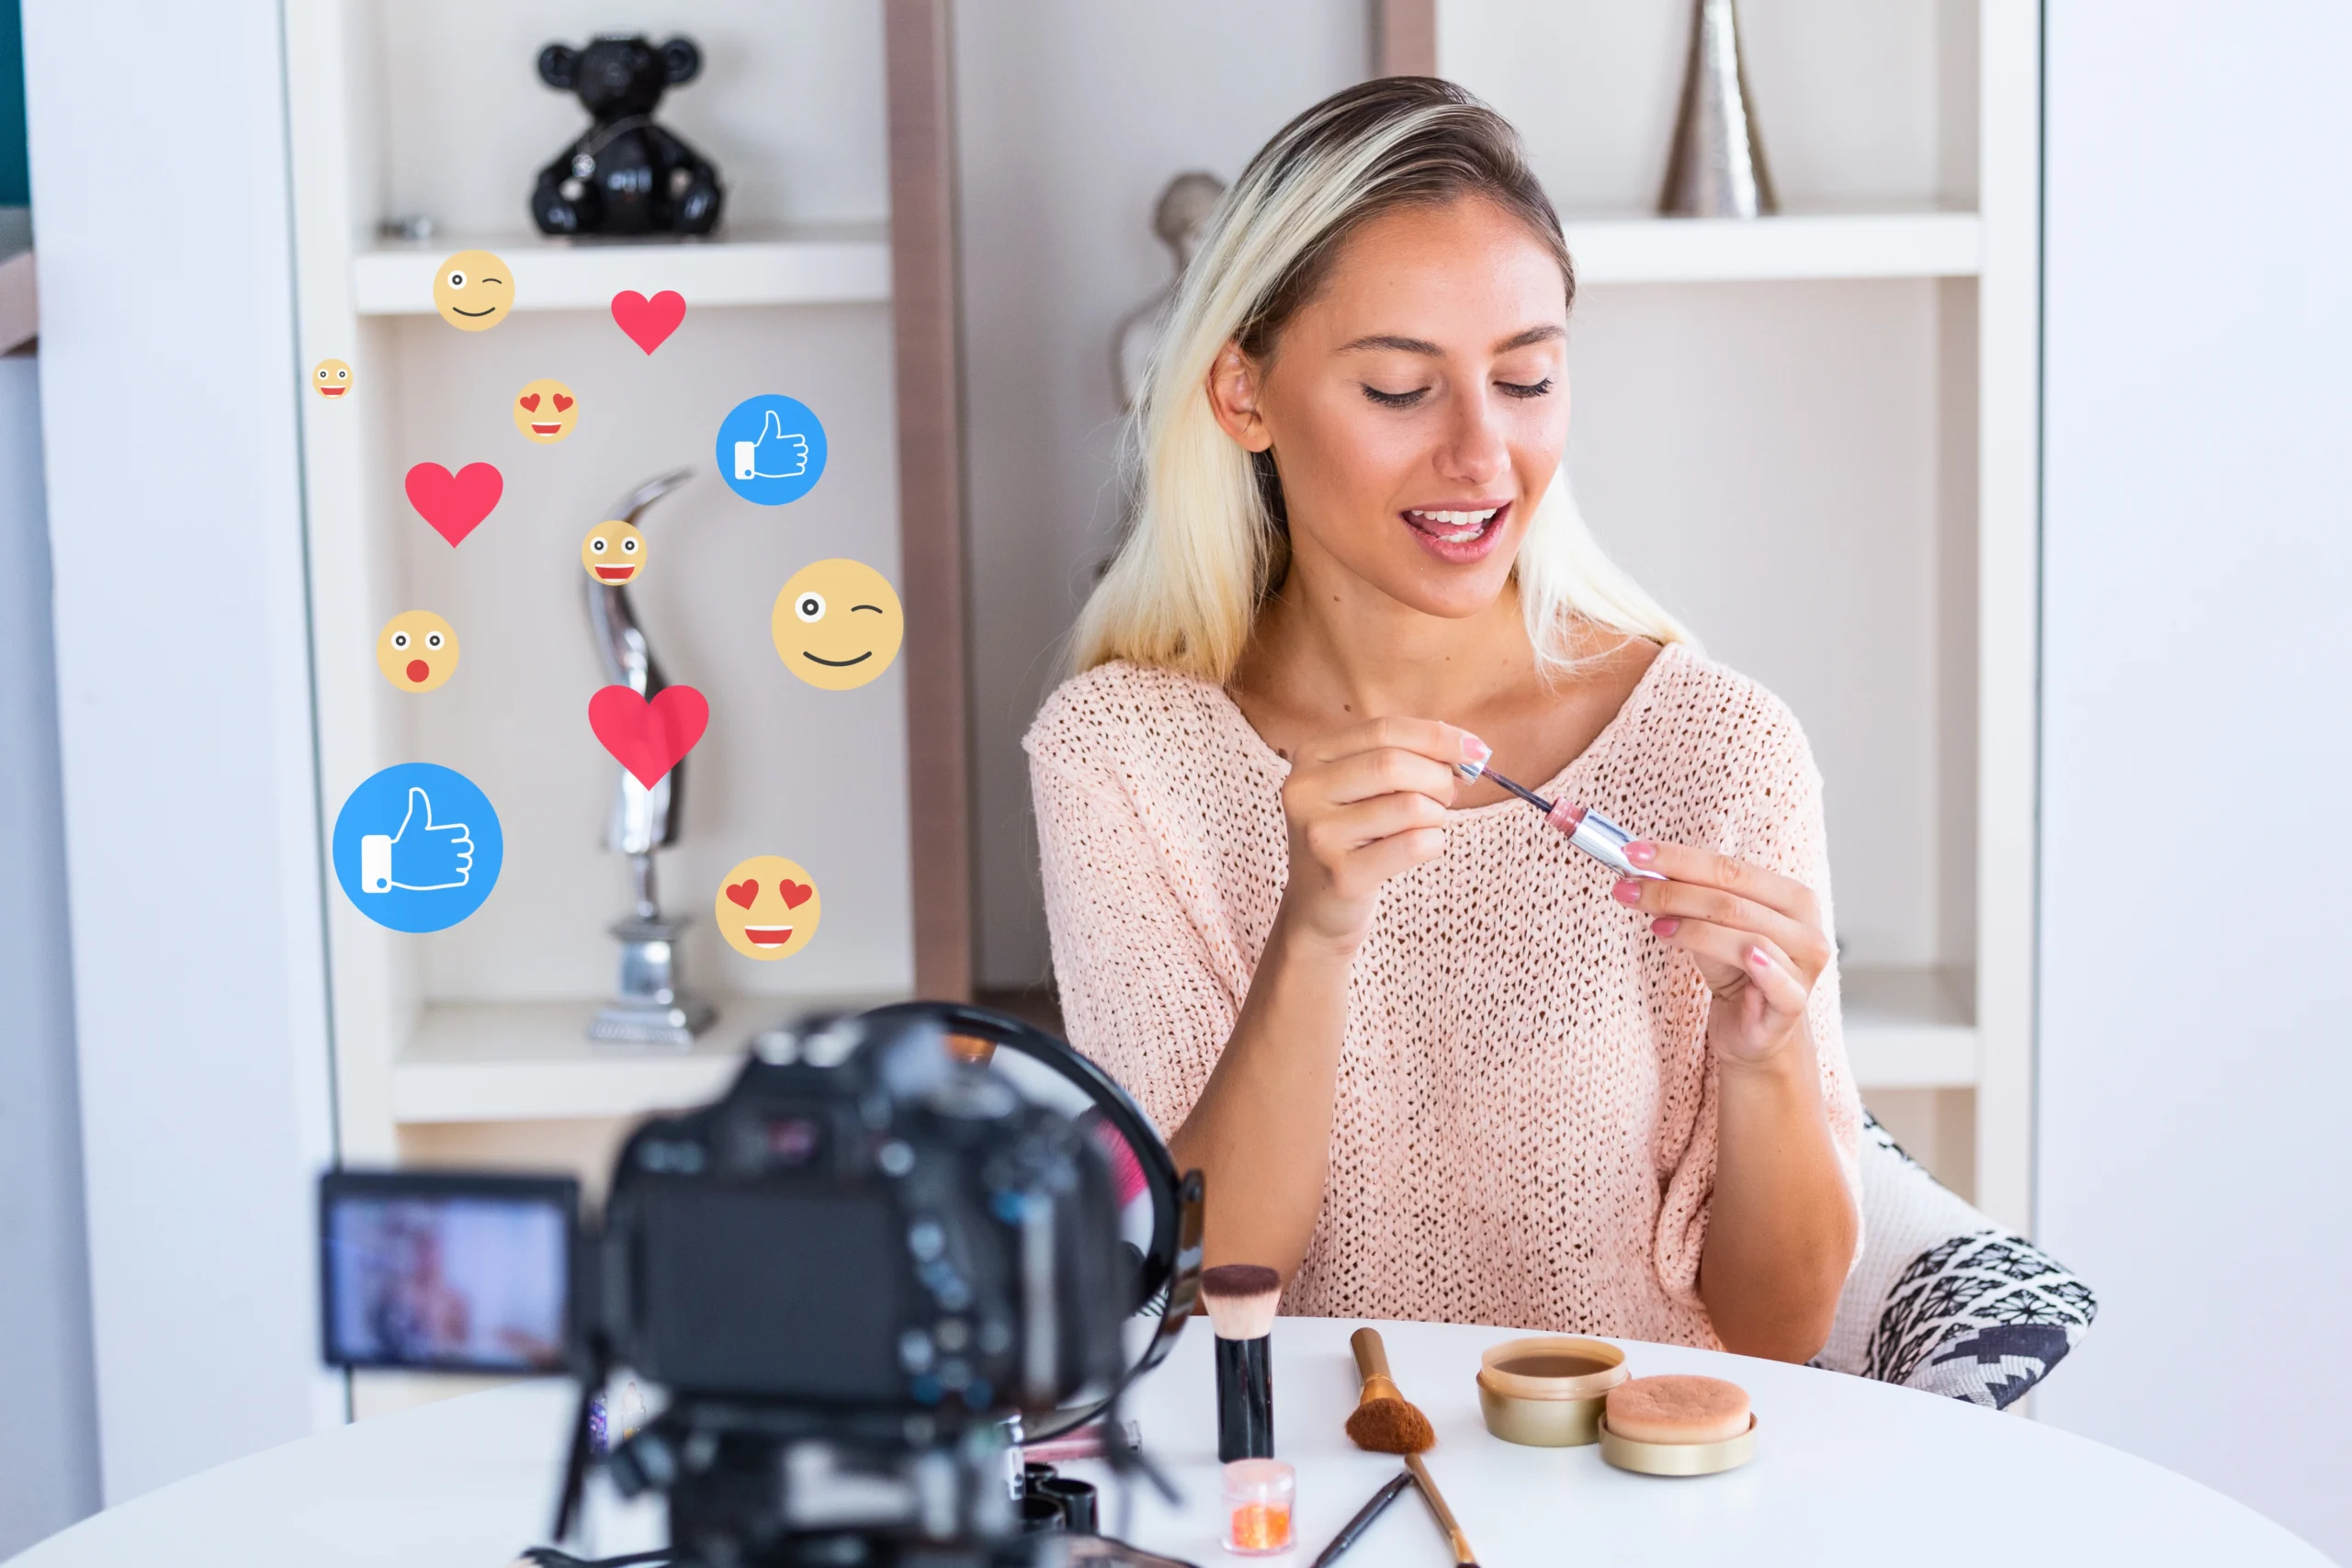 A stock photo of an influencer showing off a product in front of a camera